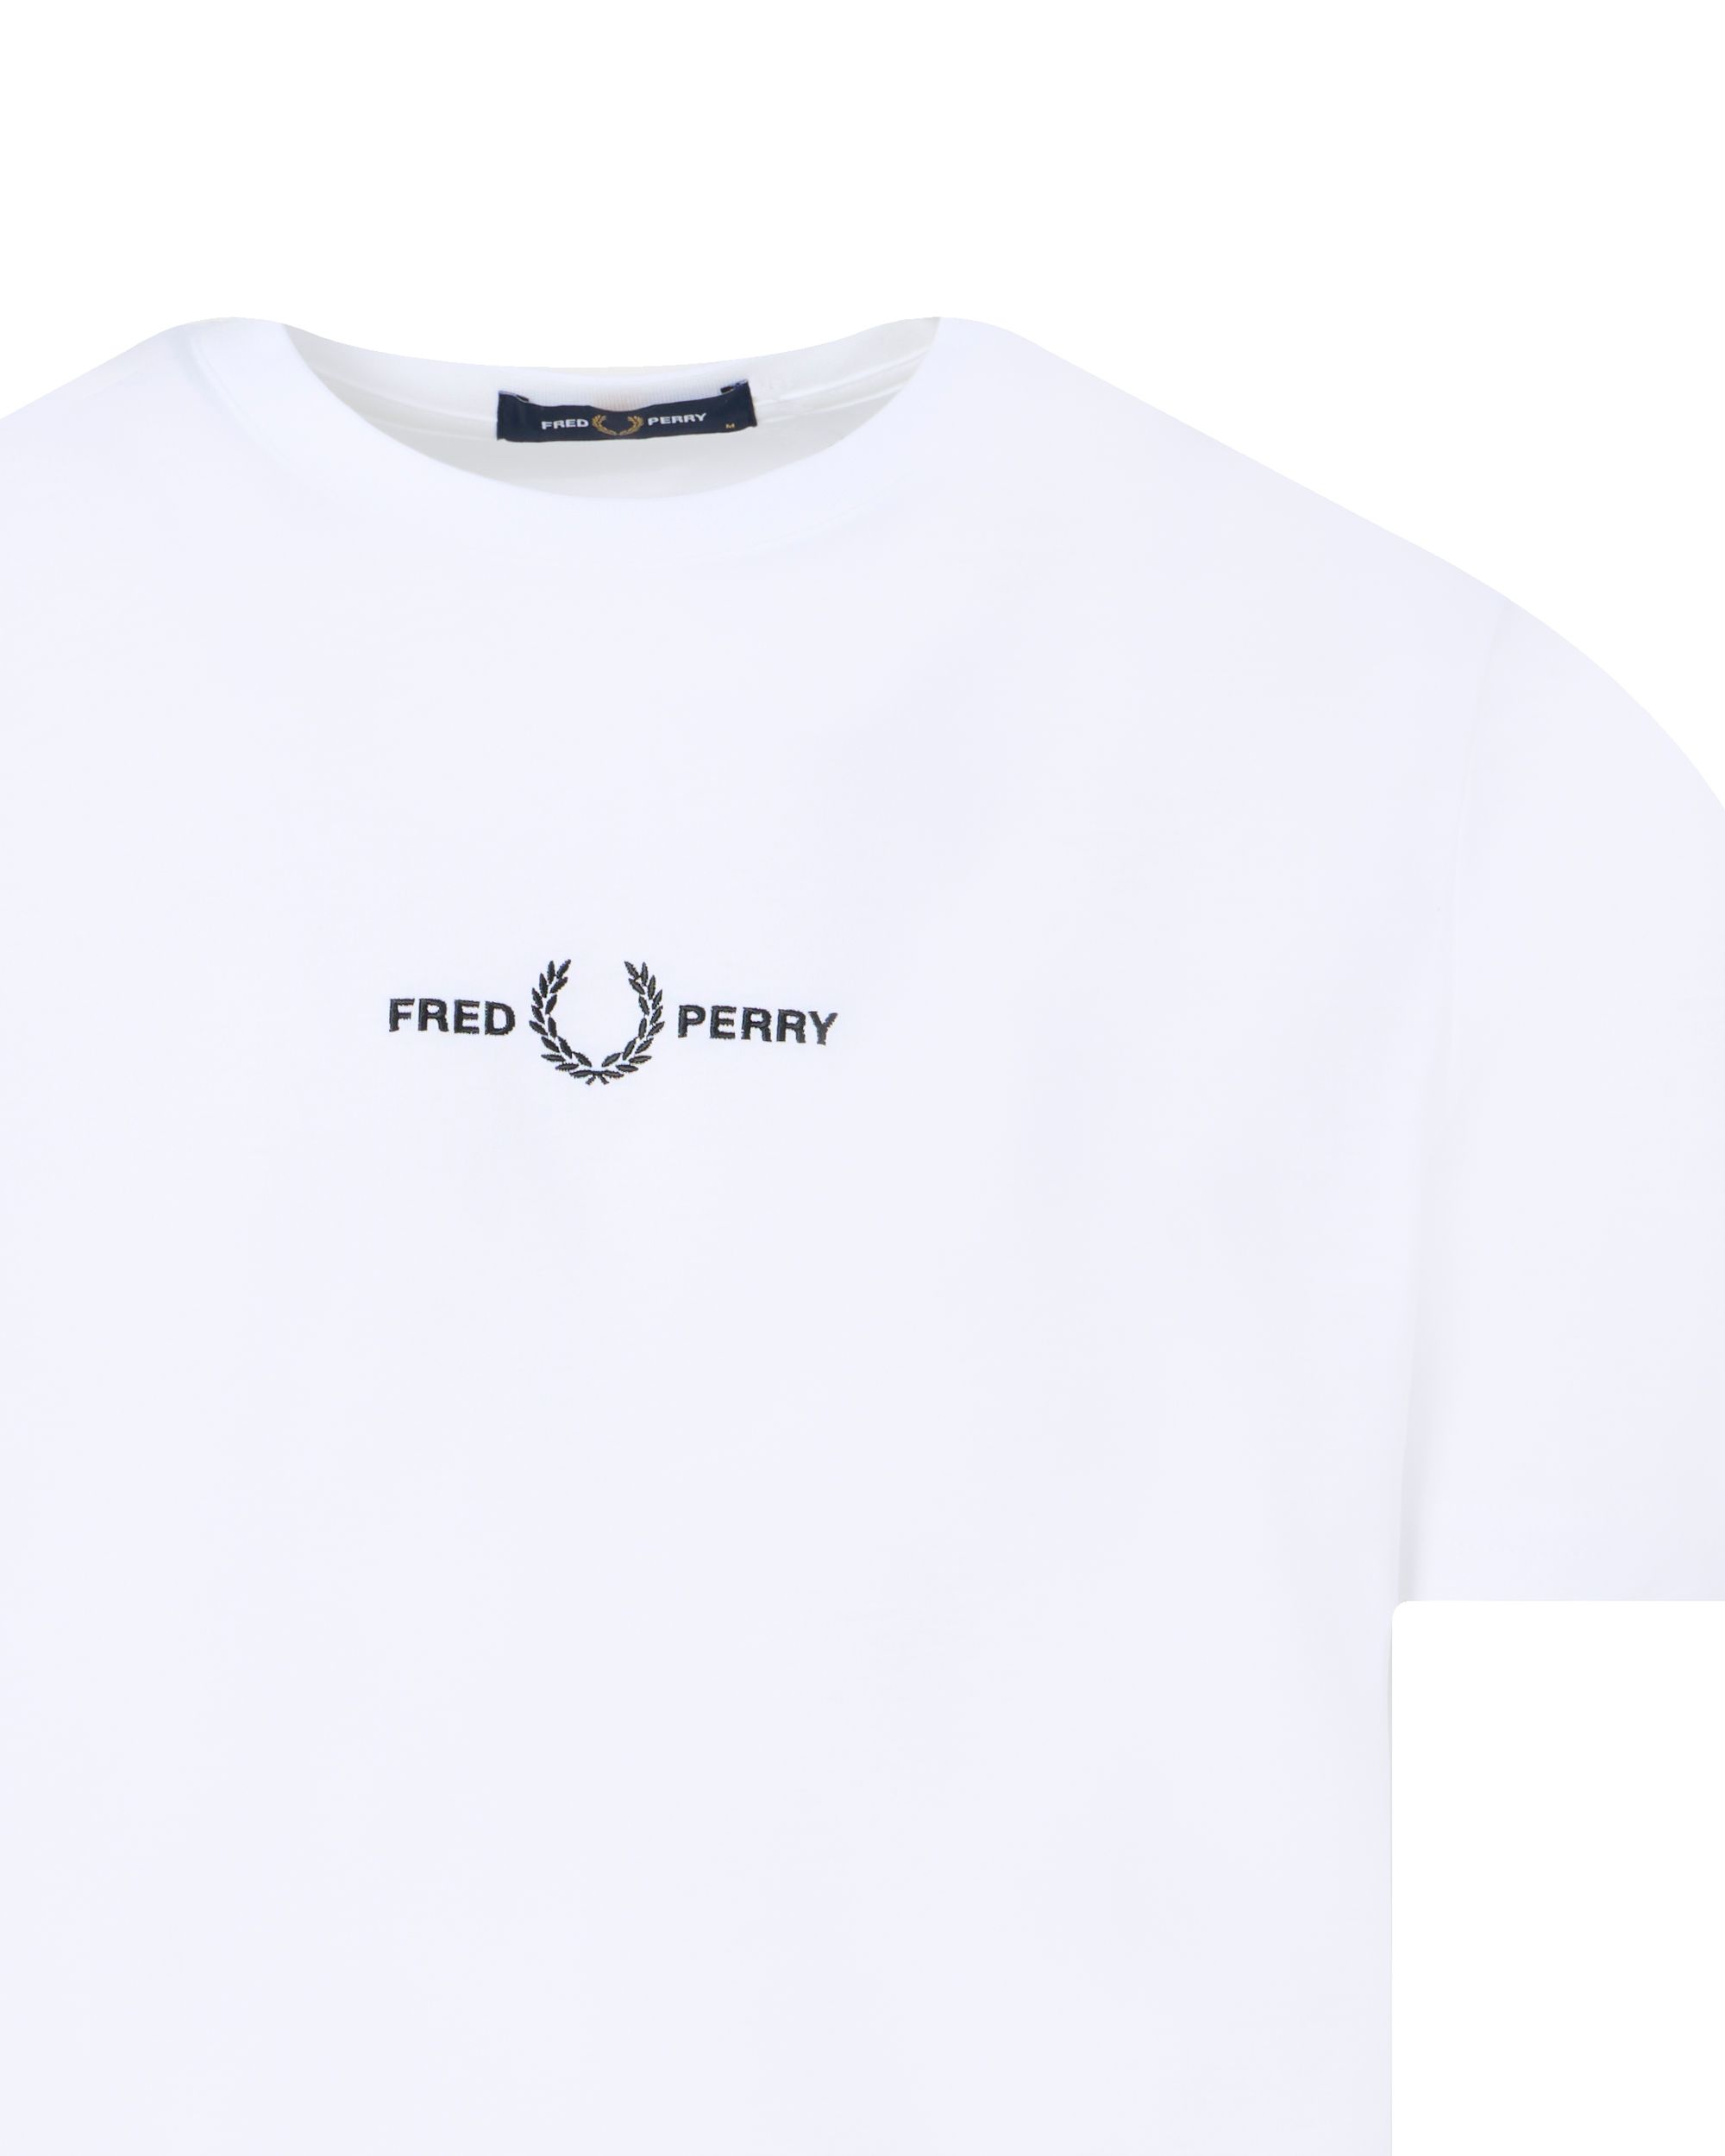 Fred Perry T-shirt KM Wit 091955-001-XXL